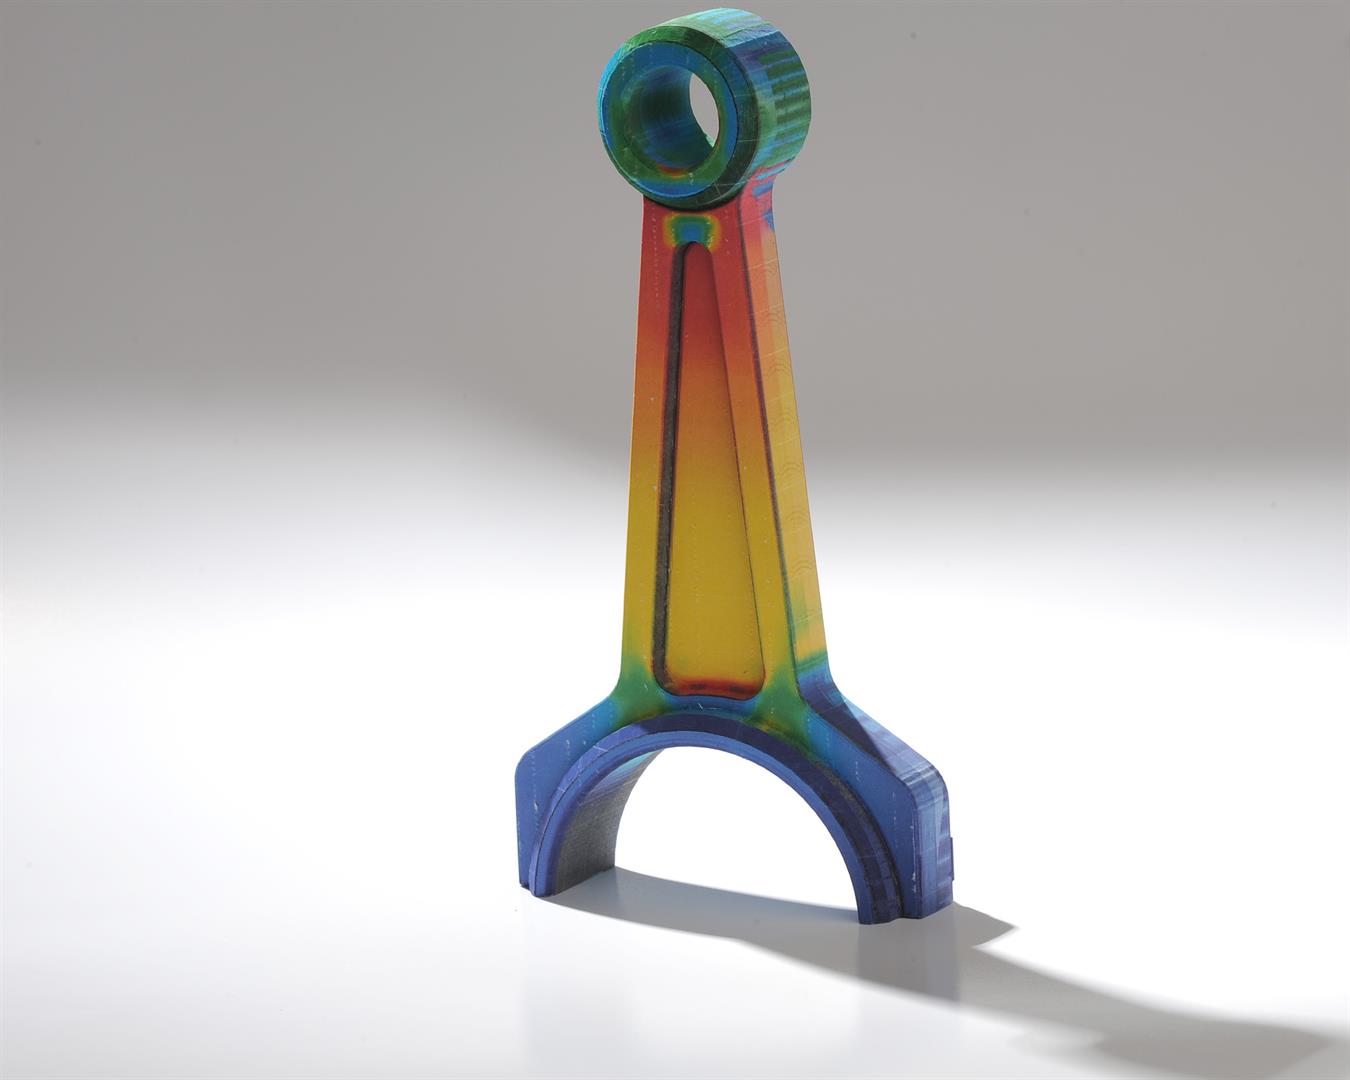 Full color, 3D printed connecting rod